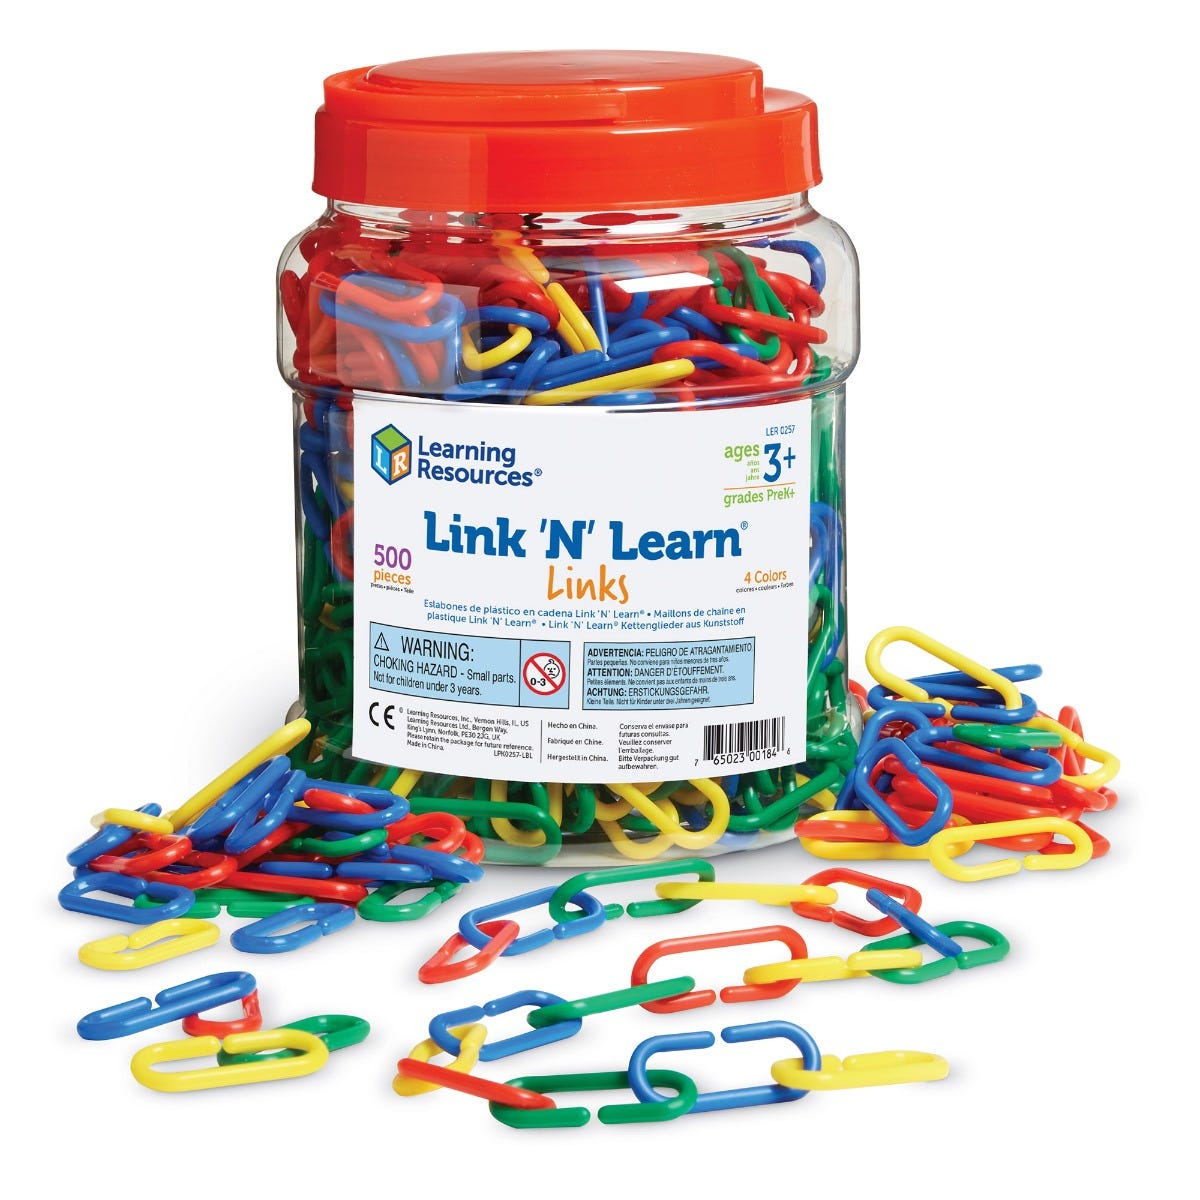 Link 'N' Learn Links Set of 500, Introduce your young learners to the fascinating world of math and design with the Link 'N' Learn Links Set of 500. This comprehensive Link 'N' Learn Links set is not just an educational tool, but also a playground for creativity and tactile exploration. Features of the Link 'N' Learn Links Set of 500: 🌈 Vivid Colors: Includes 500 links in 4 captivating colors to engage kids visually. 🤲 Fine Motor Skill Development: The act of connecting and separating the links provides exc